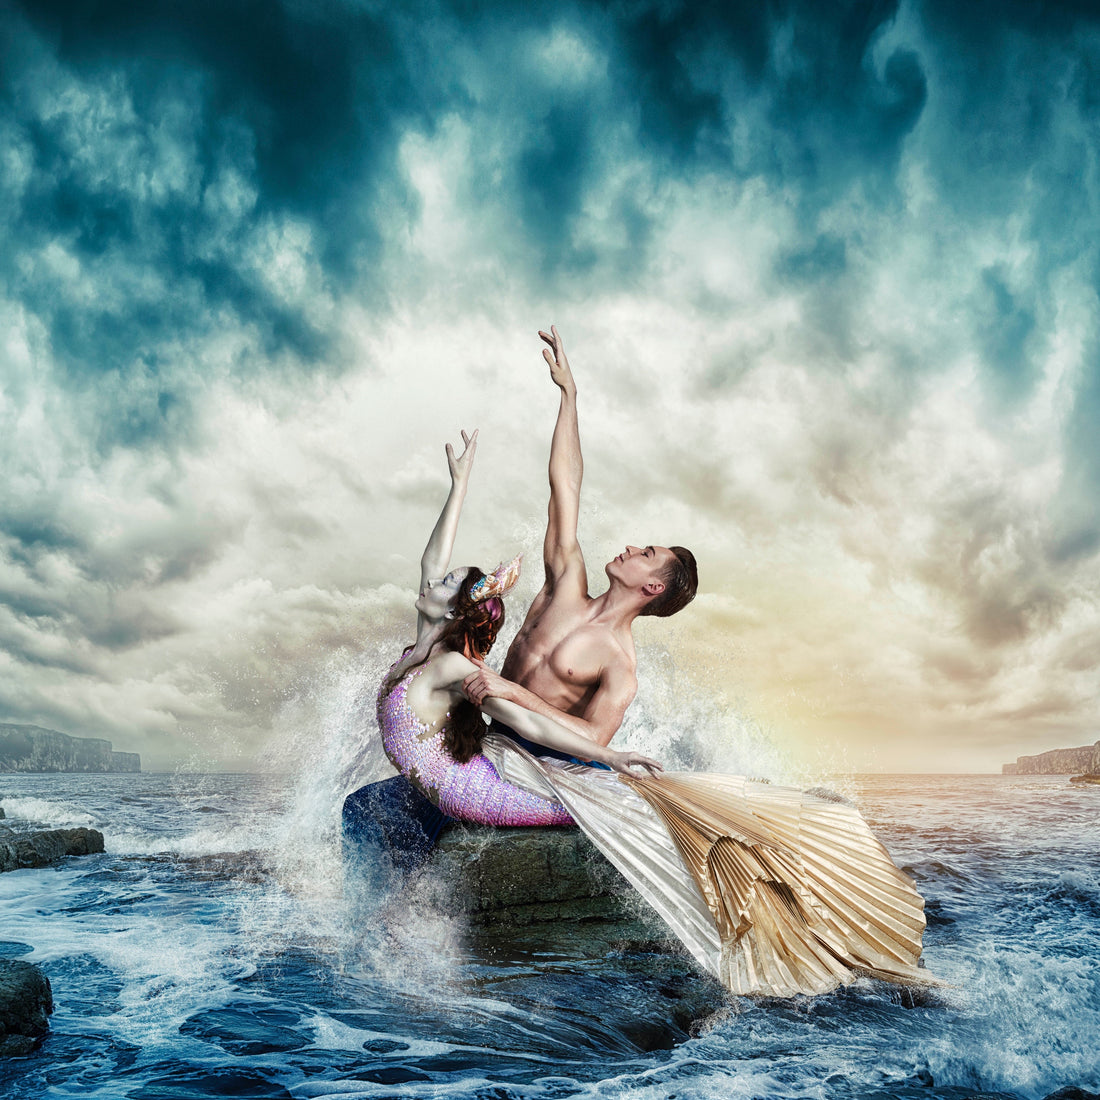 Northern Ballet’s, The Little Mermaid is coming to the Grand Opera House